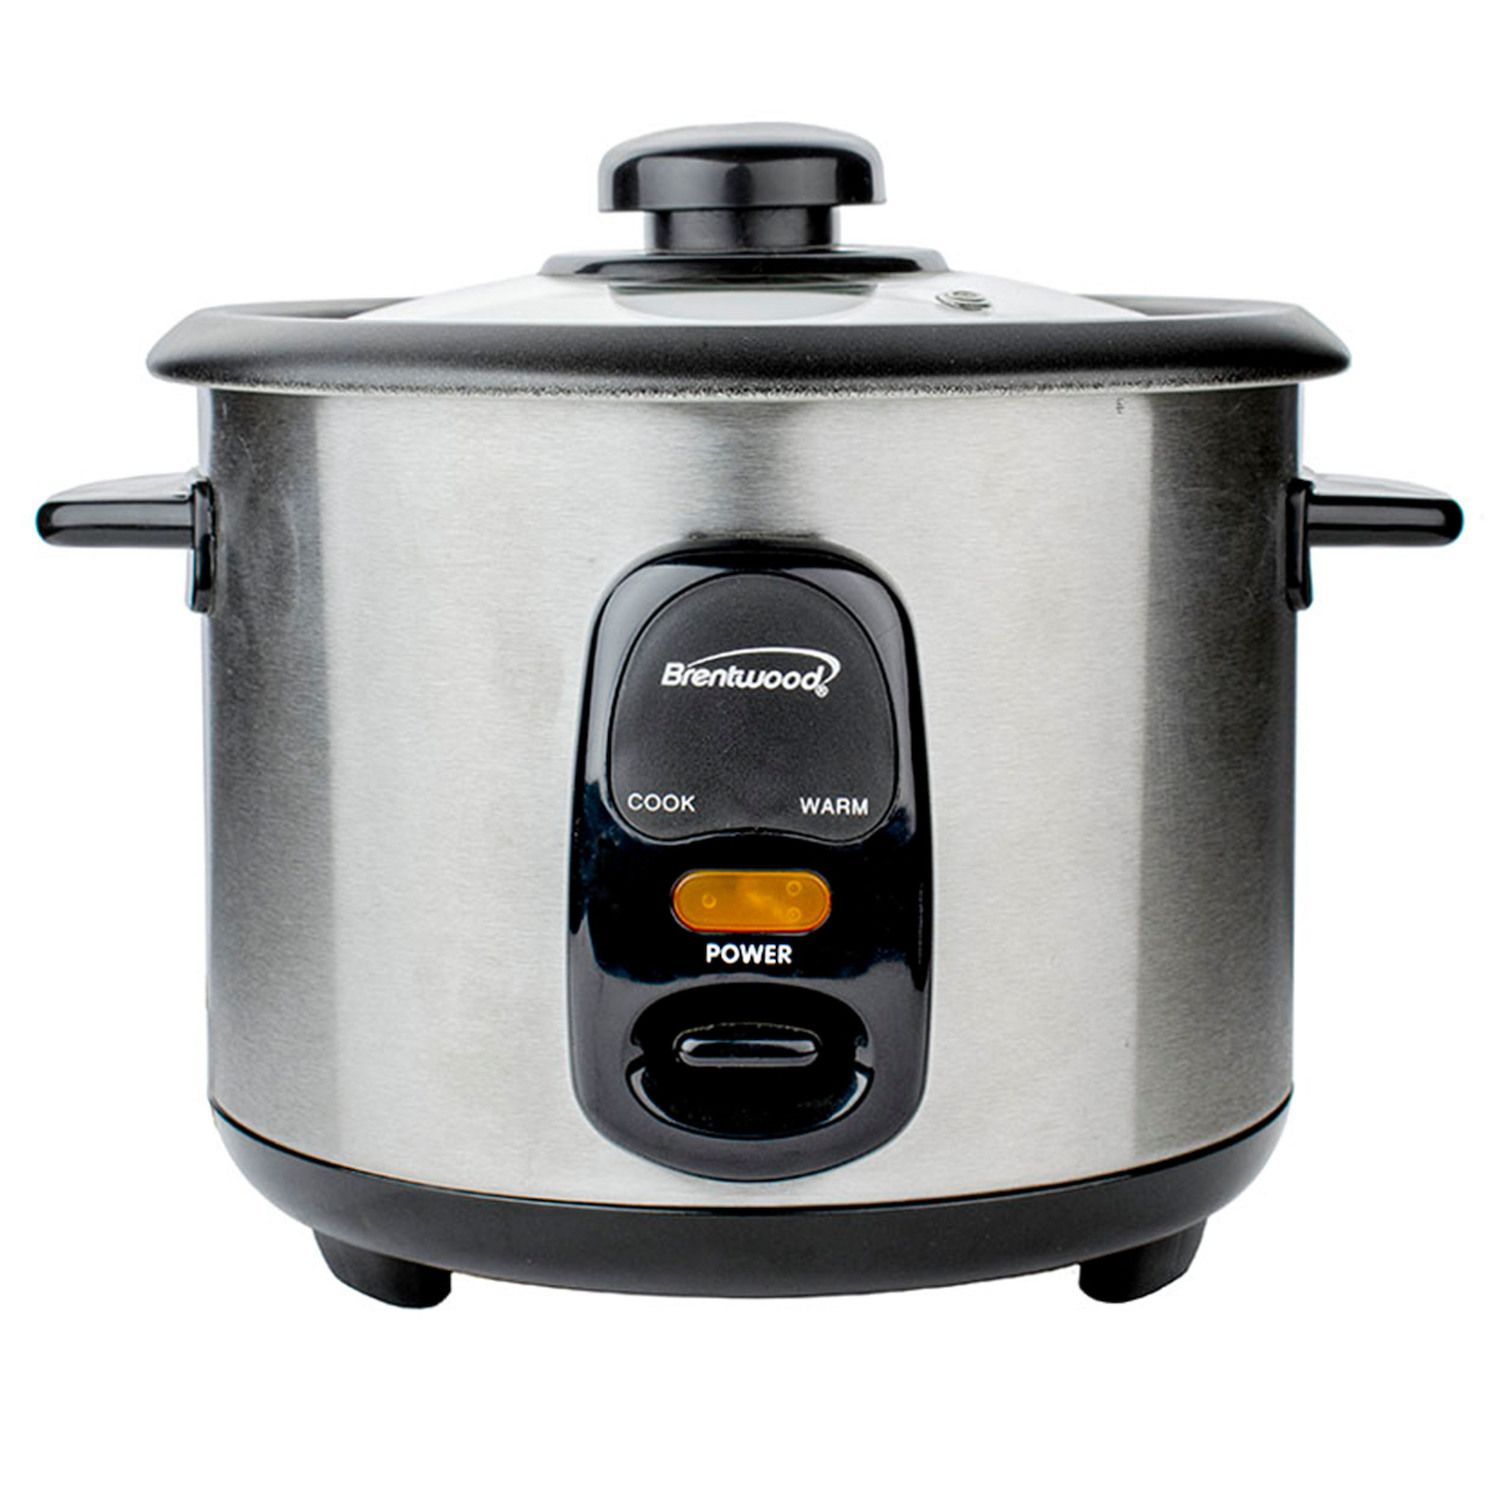 Oster DiamondForce 6 Cup Nonstick Electric Rice Cooker - Black